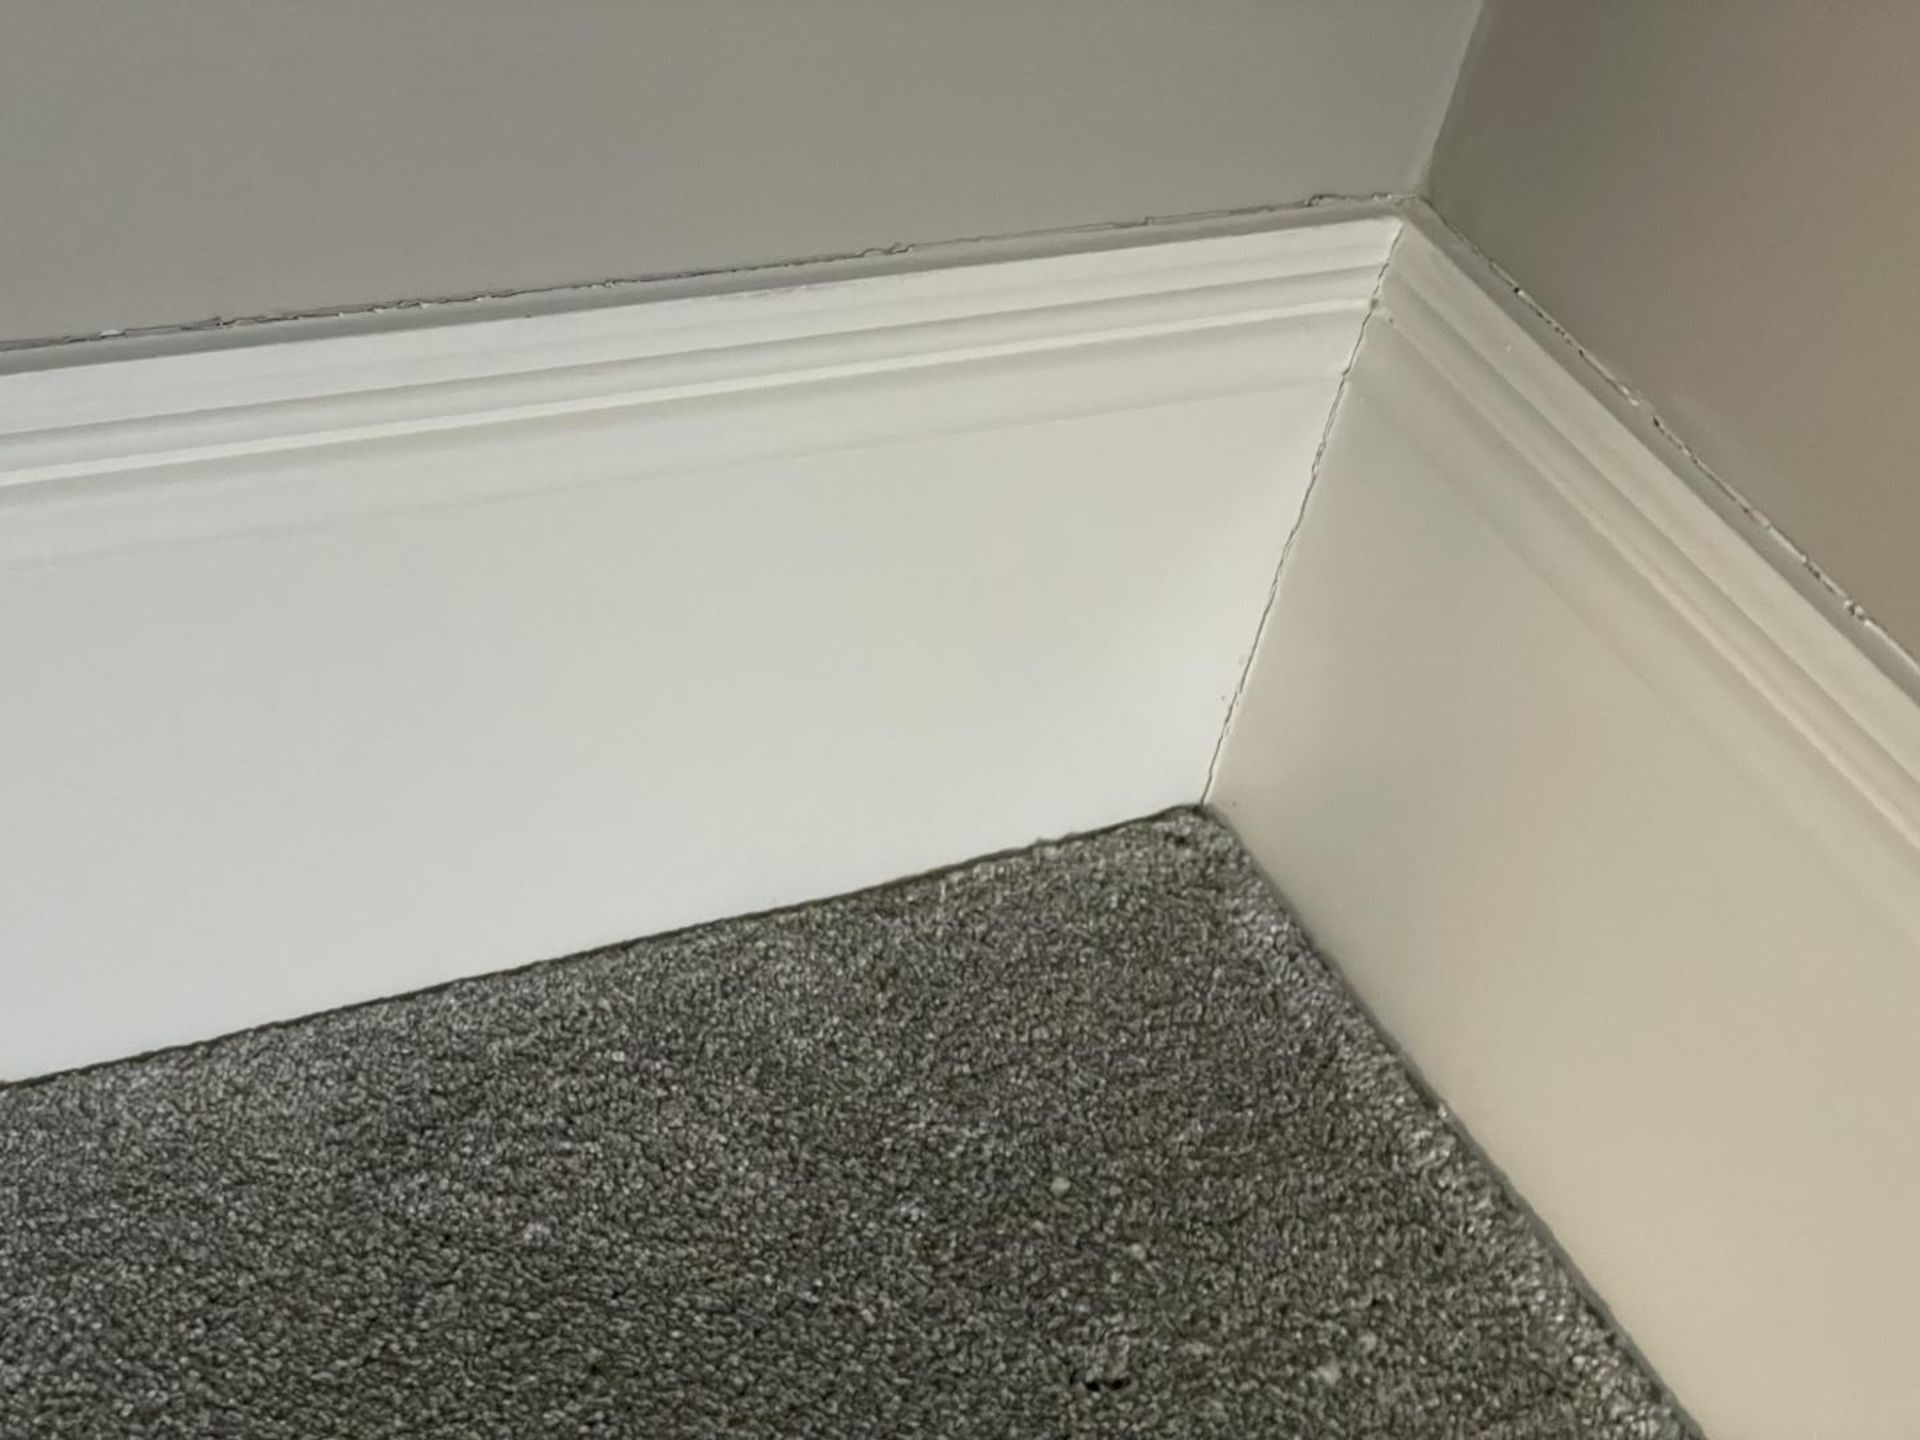 Approximately 10-Metres of Painted Timber Wooden Skirting Boards, In White - Ref: PAN210 - CL896 - - Image 8 of 9